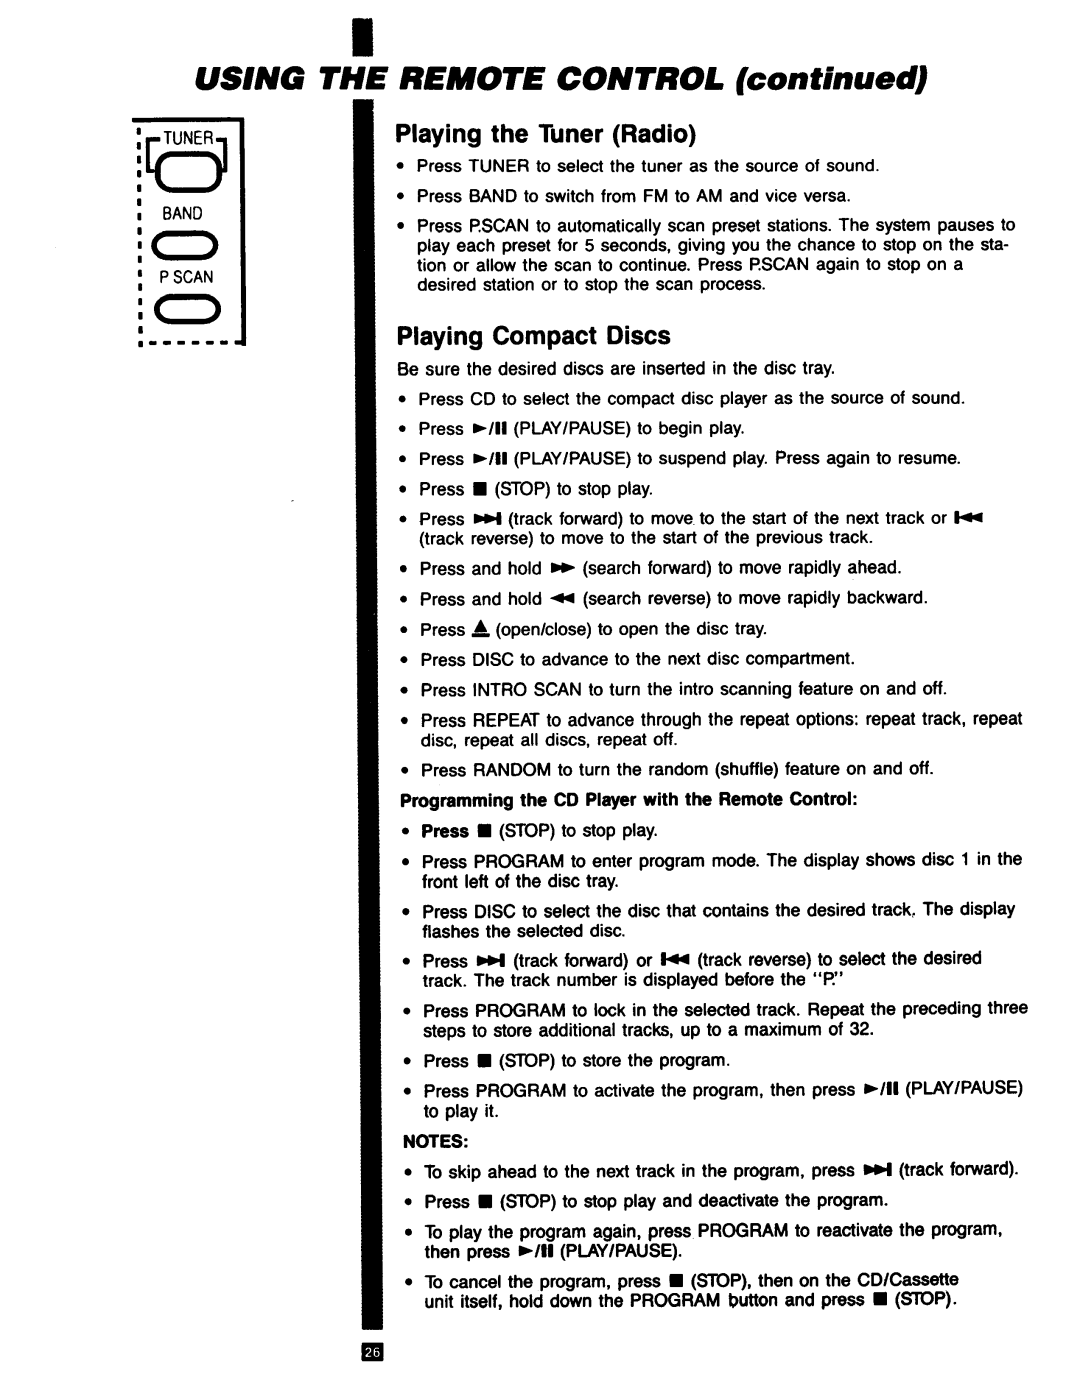 RCA RP-9753 manual USING THE REMOTE CONTROL continued, Playing the Tuner Radio, Playing Compact Discs 